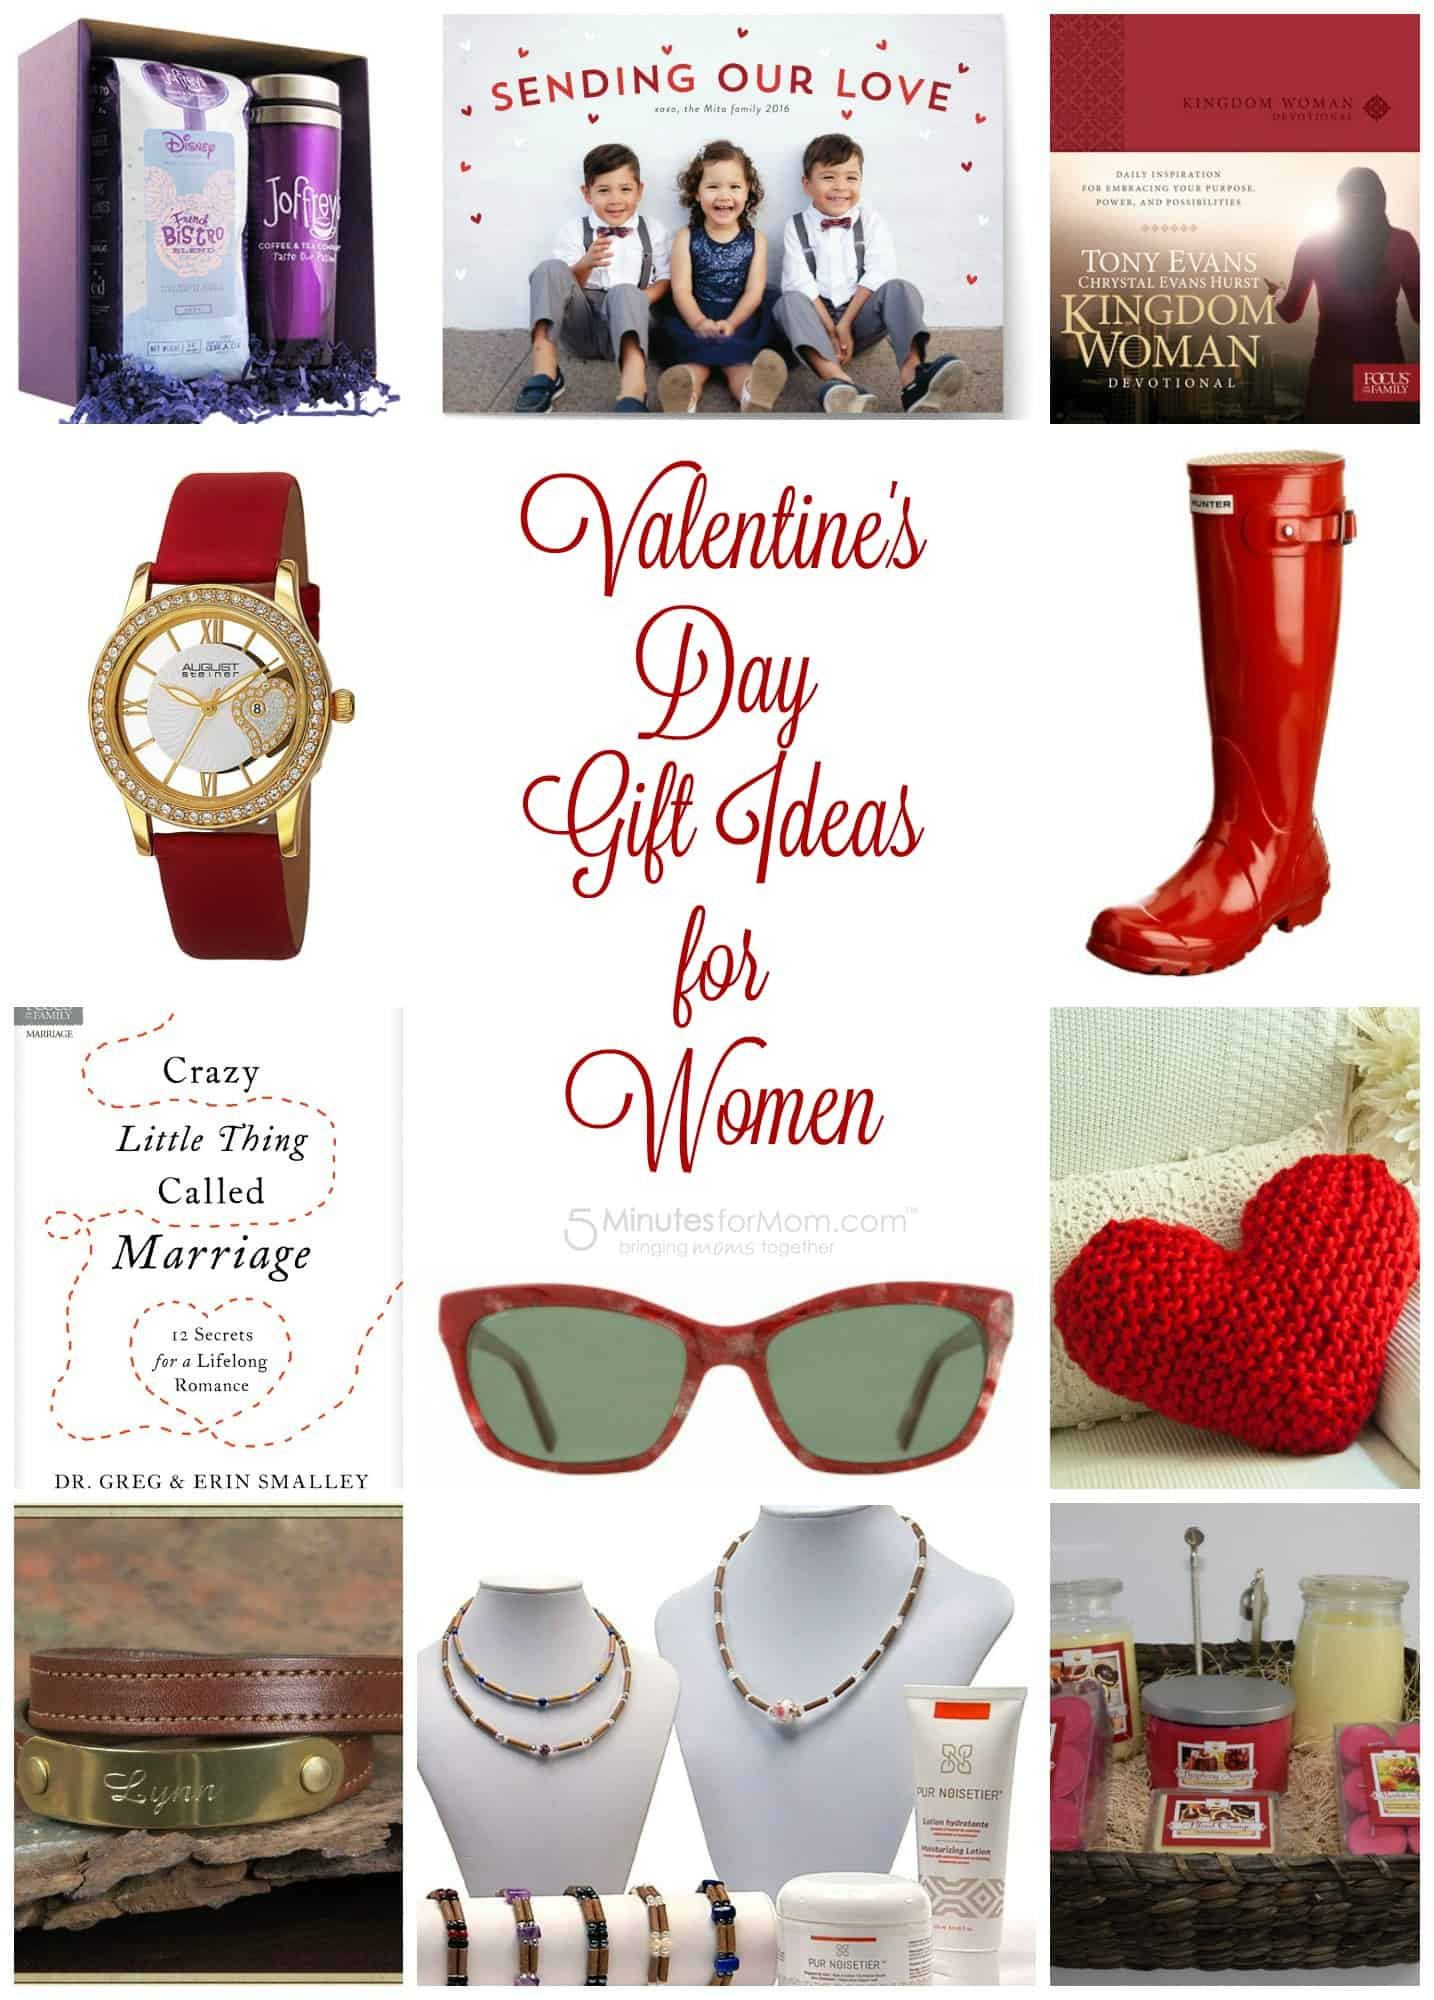 Valentine Gift Ideas For Women
 Valentine s Day Gift Guide for Women Plus $100 Amazon